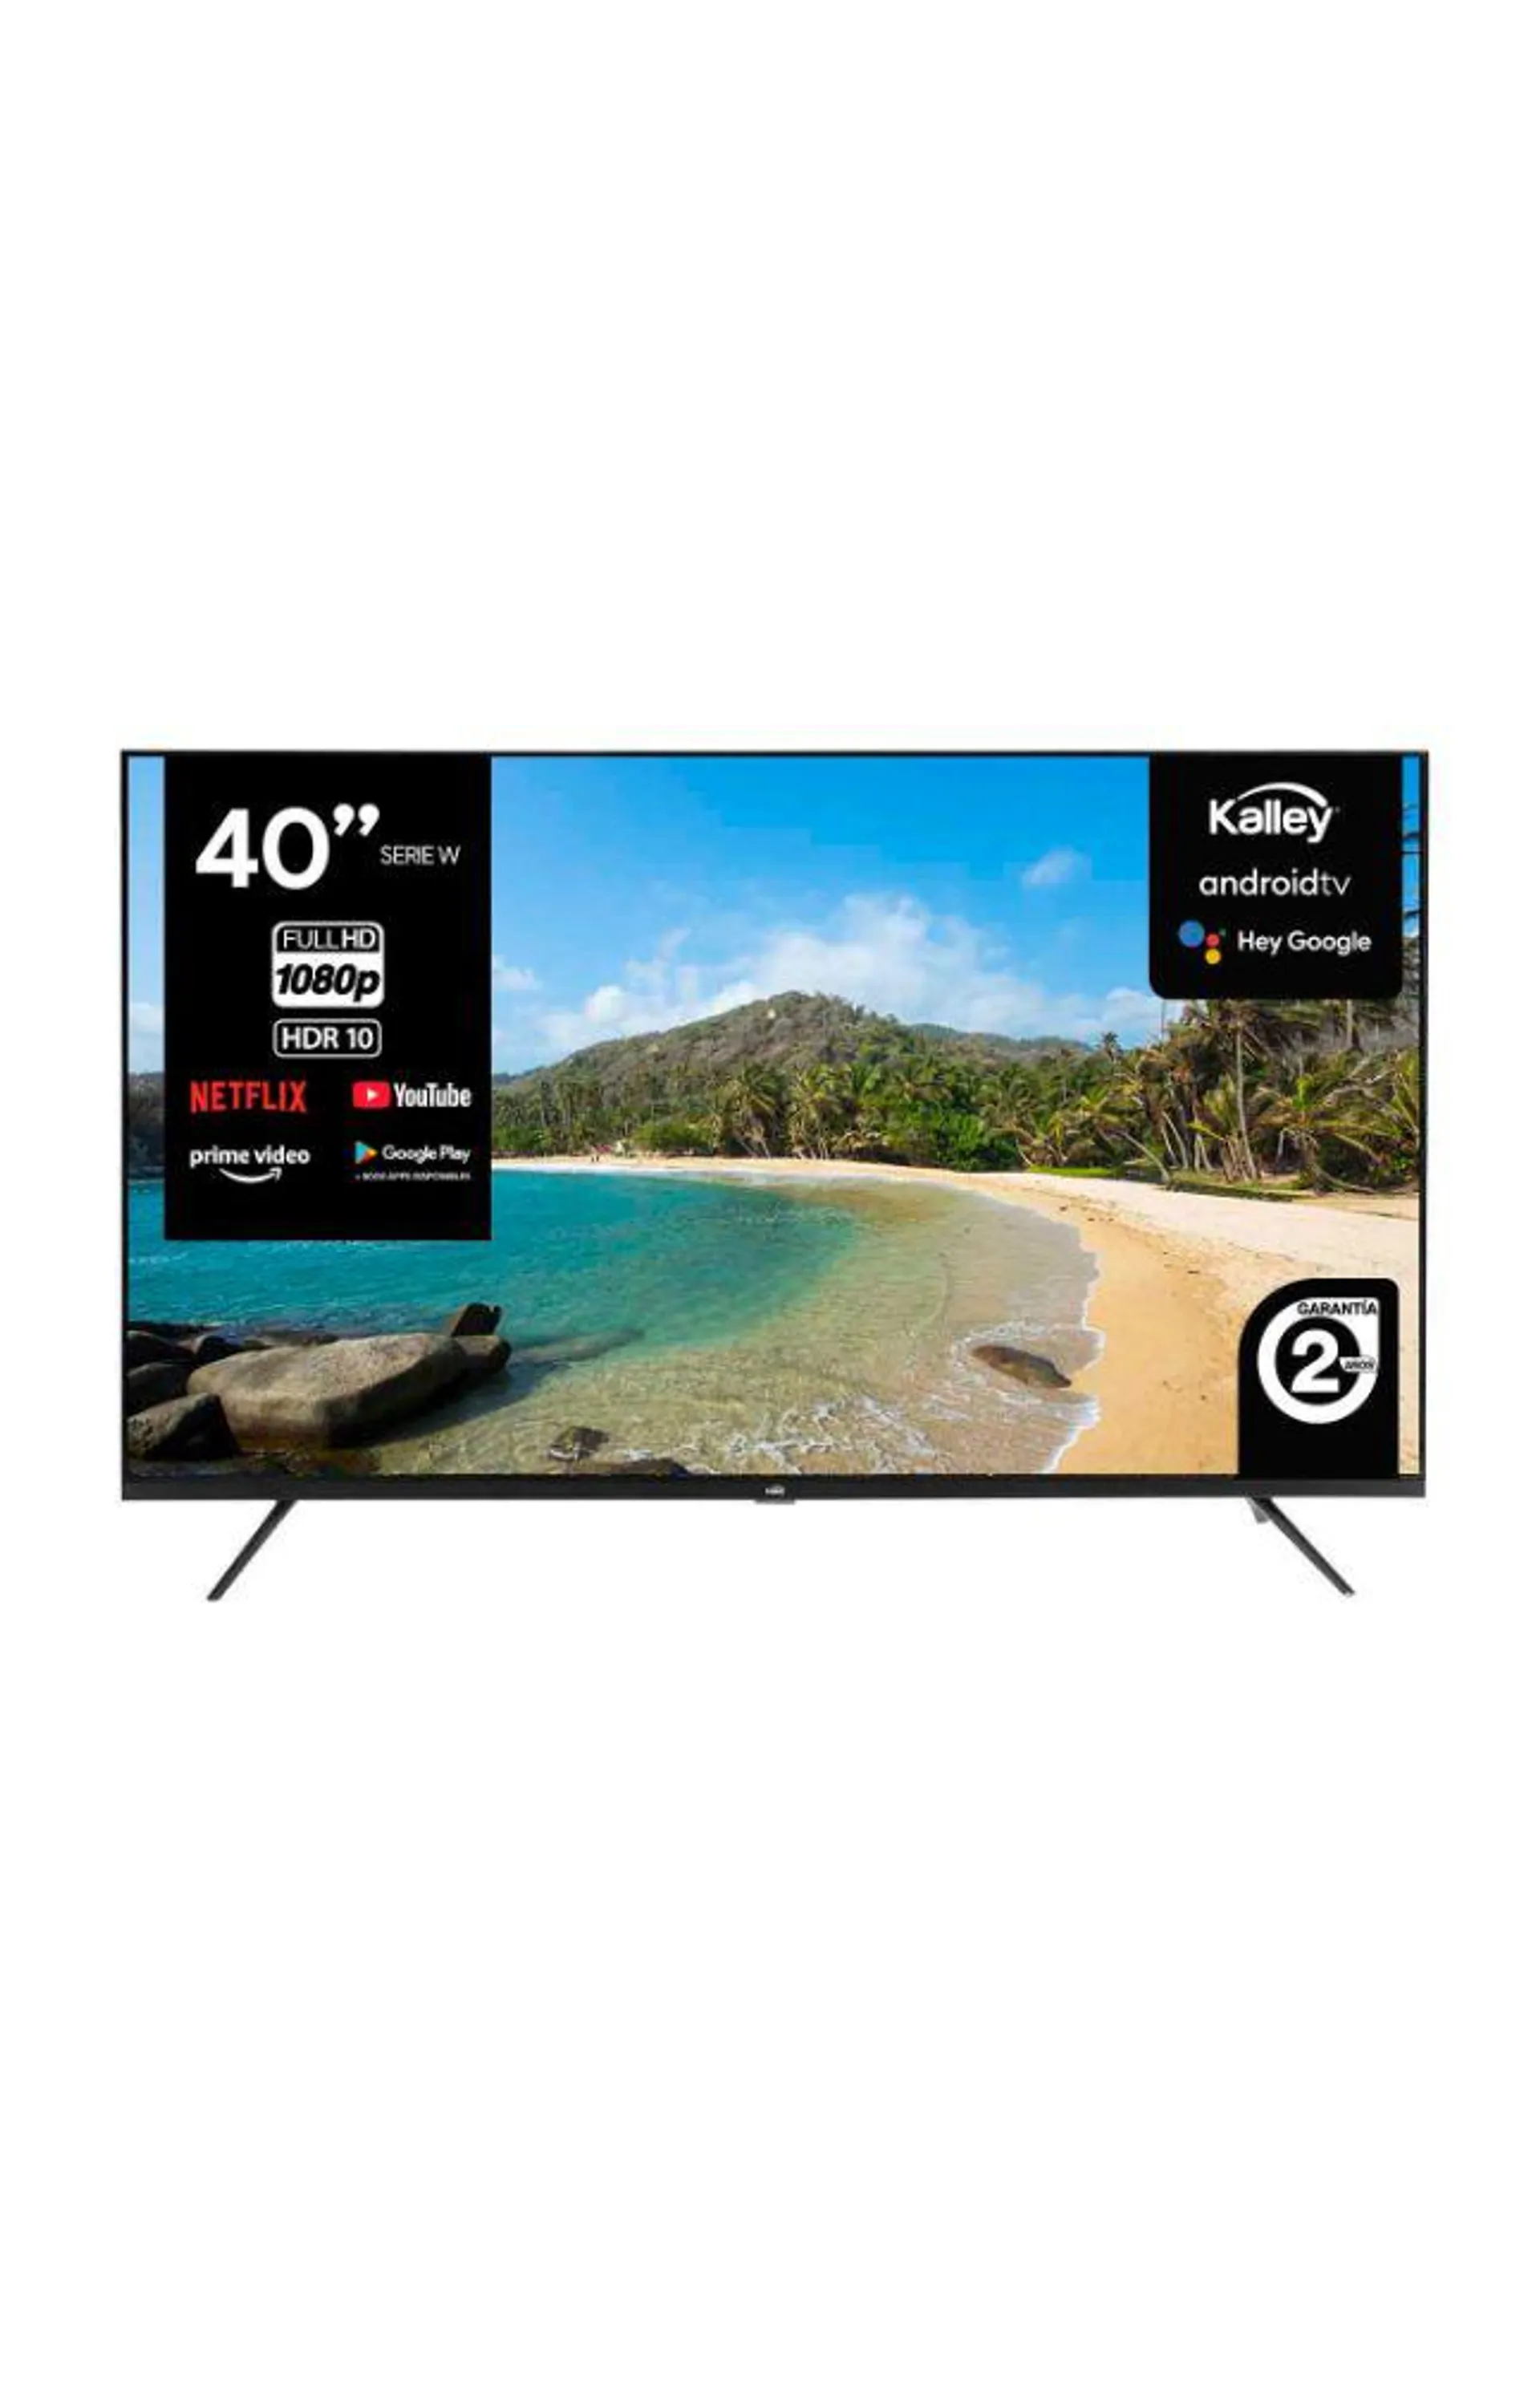 TV Kalley 40" K-ATV40FHDW FHD LED Smart TV Android